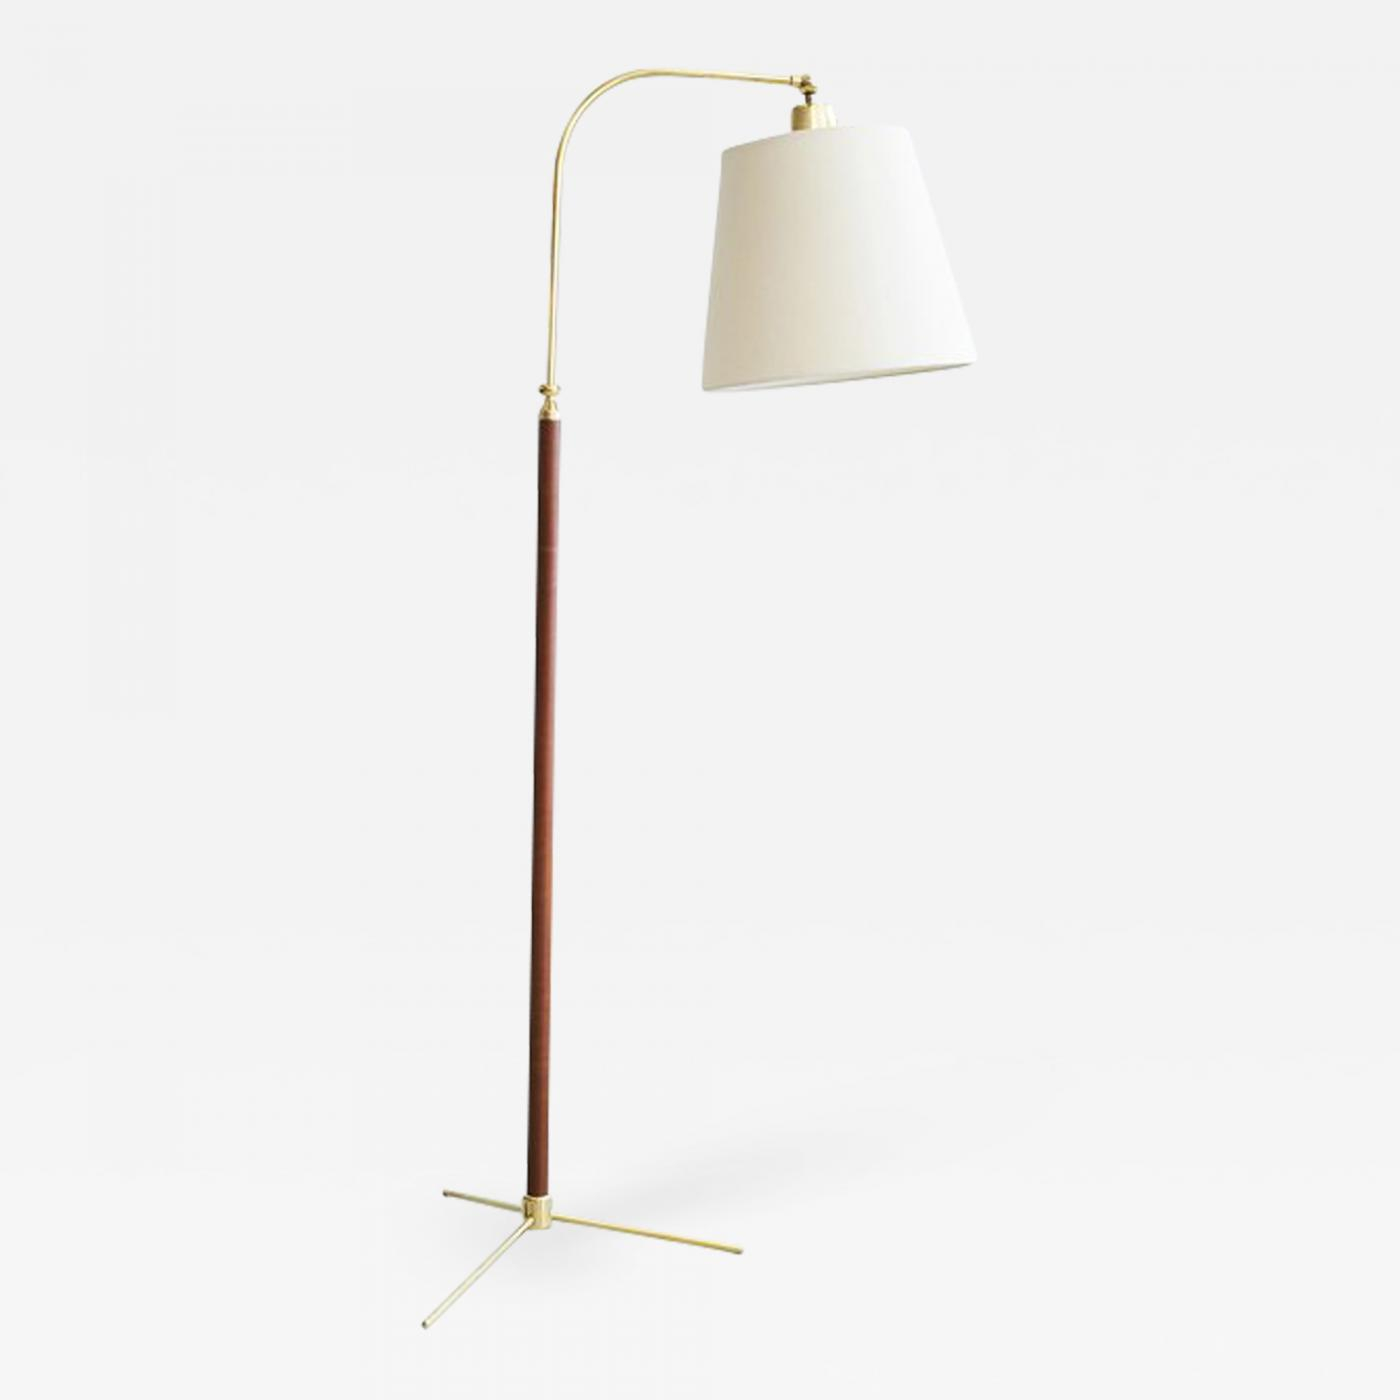 Jacques Adnet Adnet Floor Lamp intended for sizing 1400 X 1400